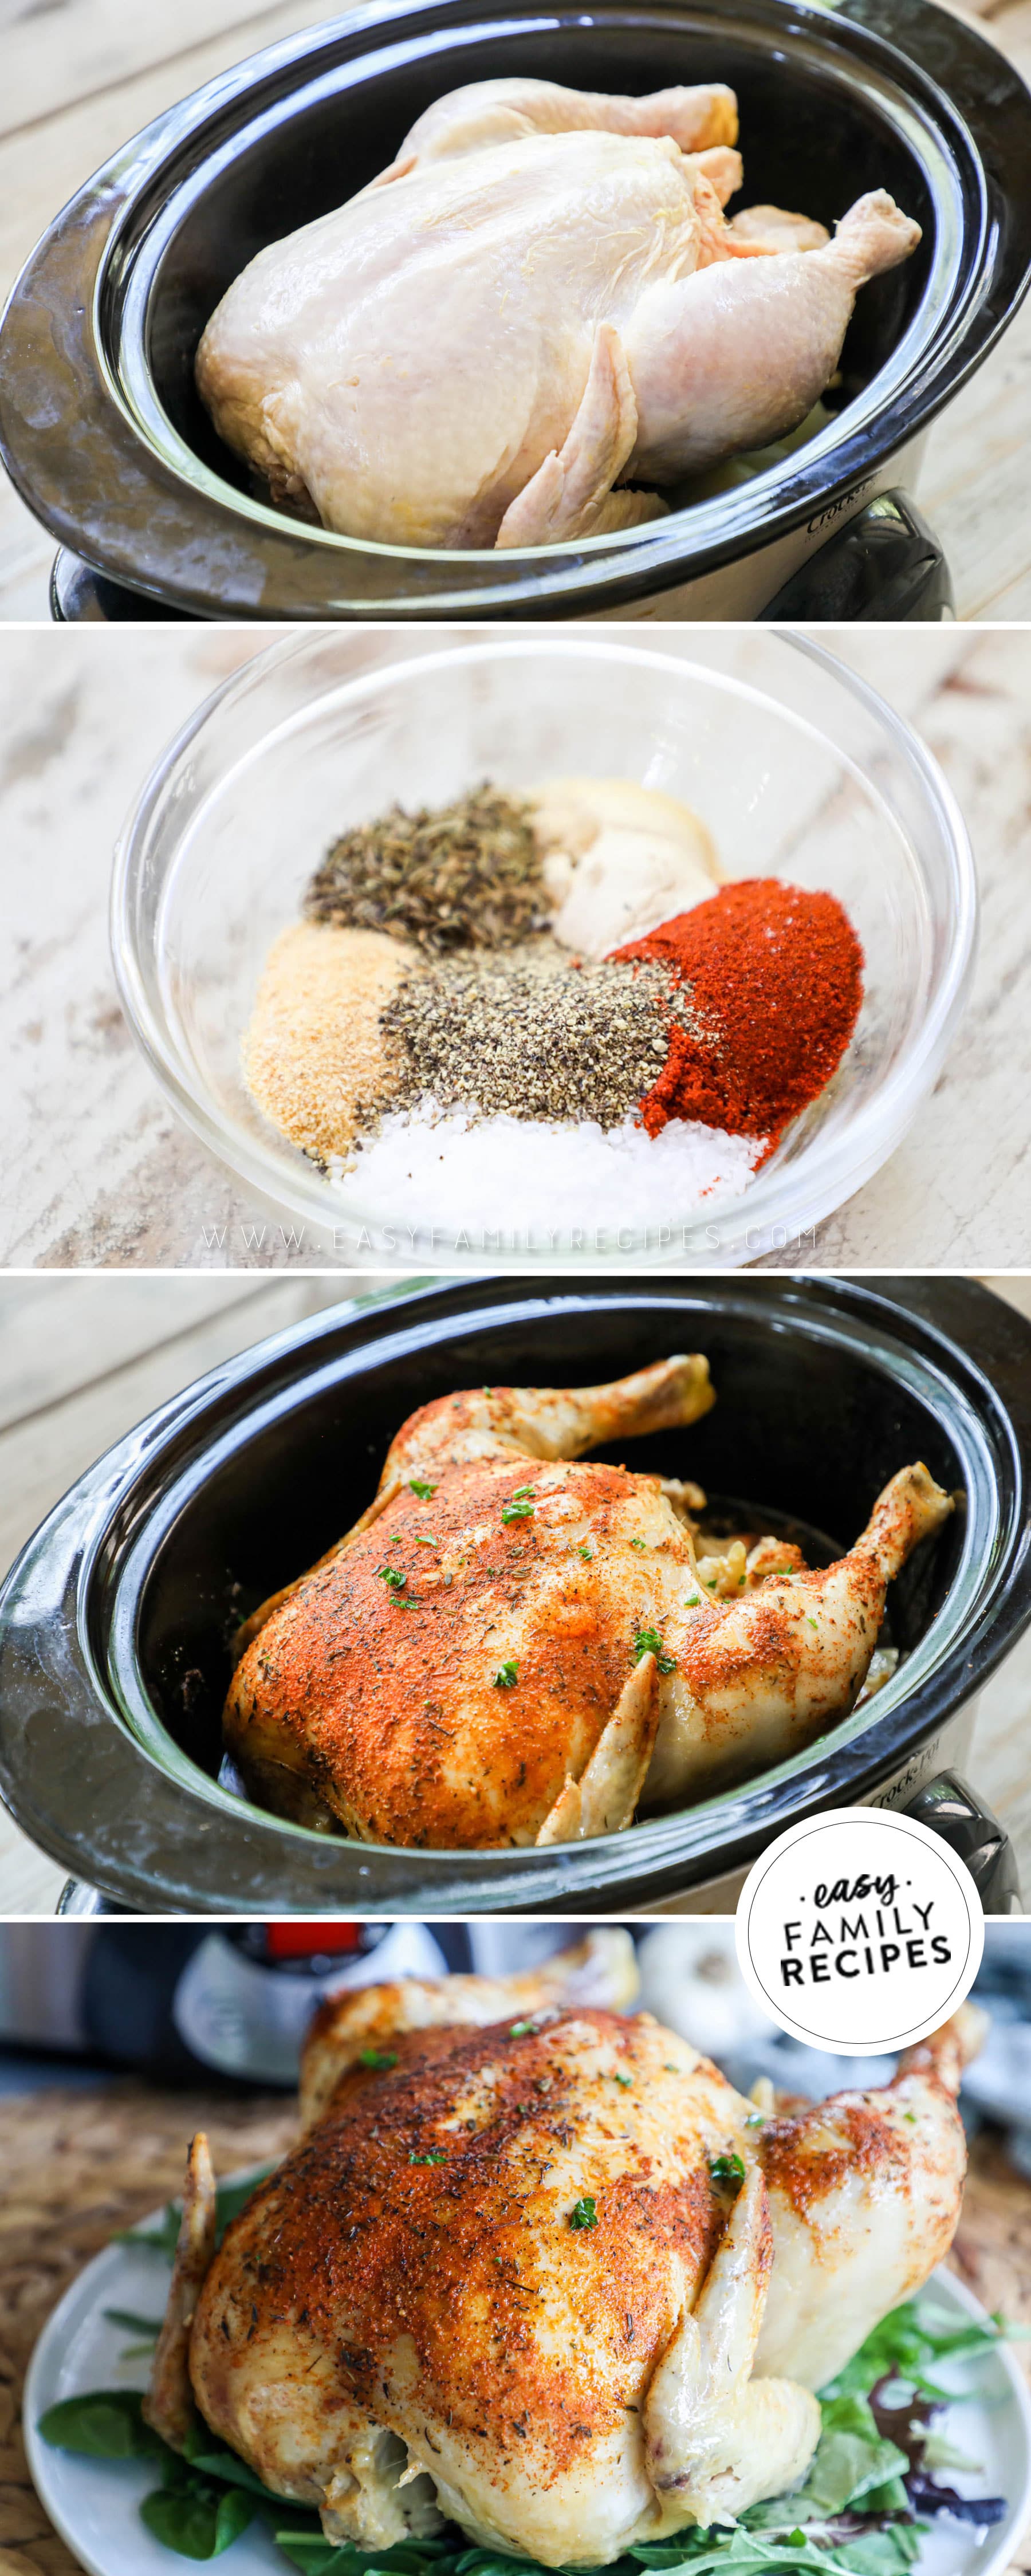 How to make Crock Pot rotisserie chicken 1)buy a chicken that fits 2)assemble spice blend 3)rub chicken 4)cook and serve